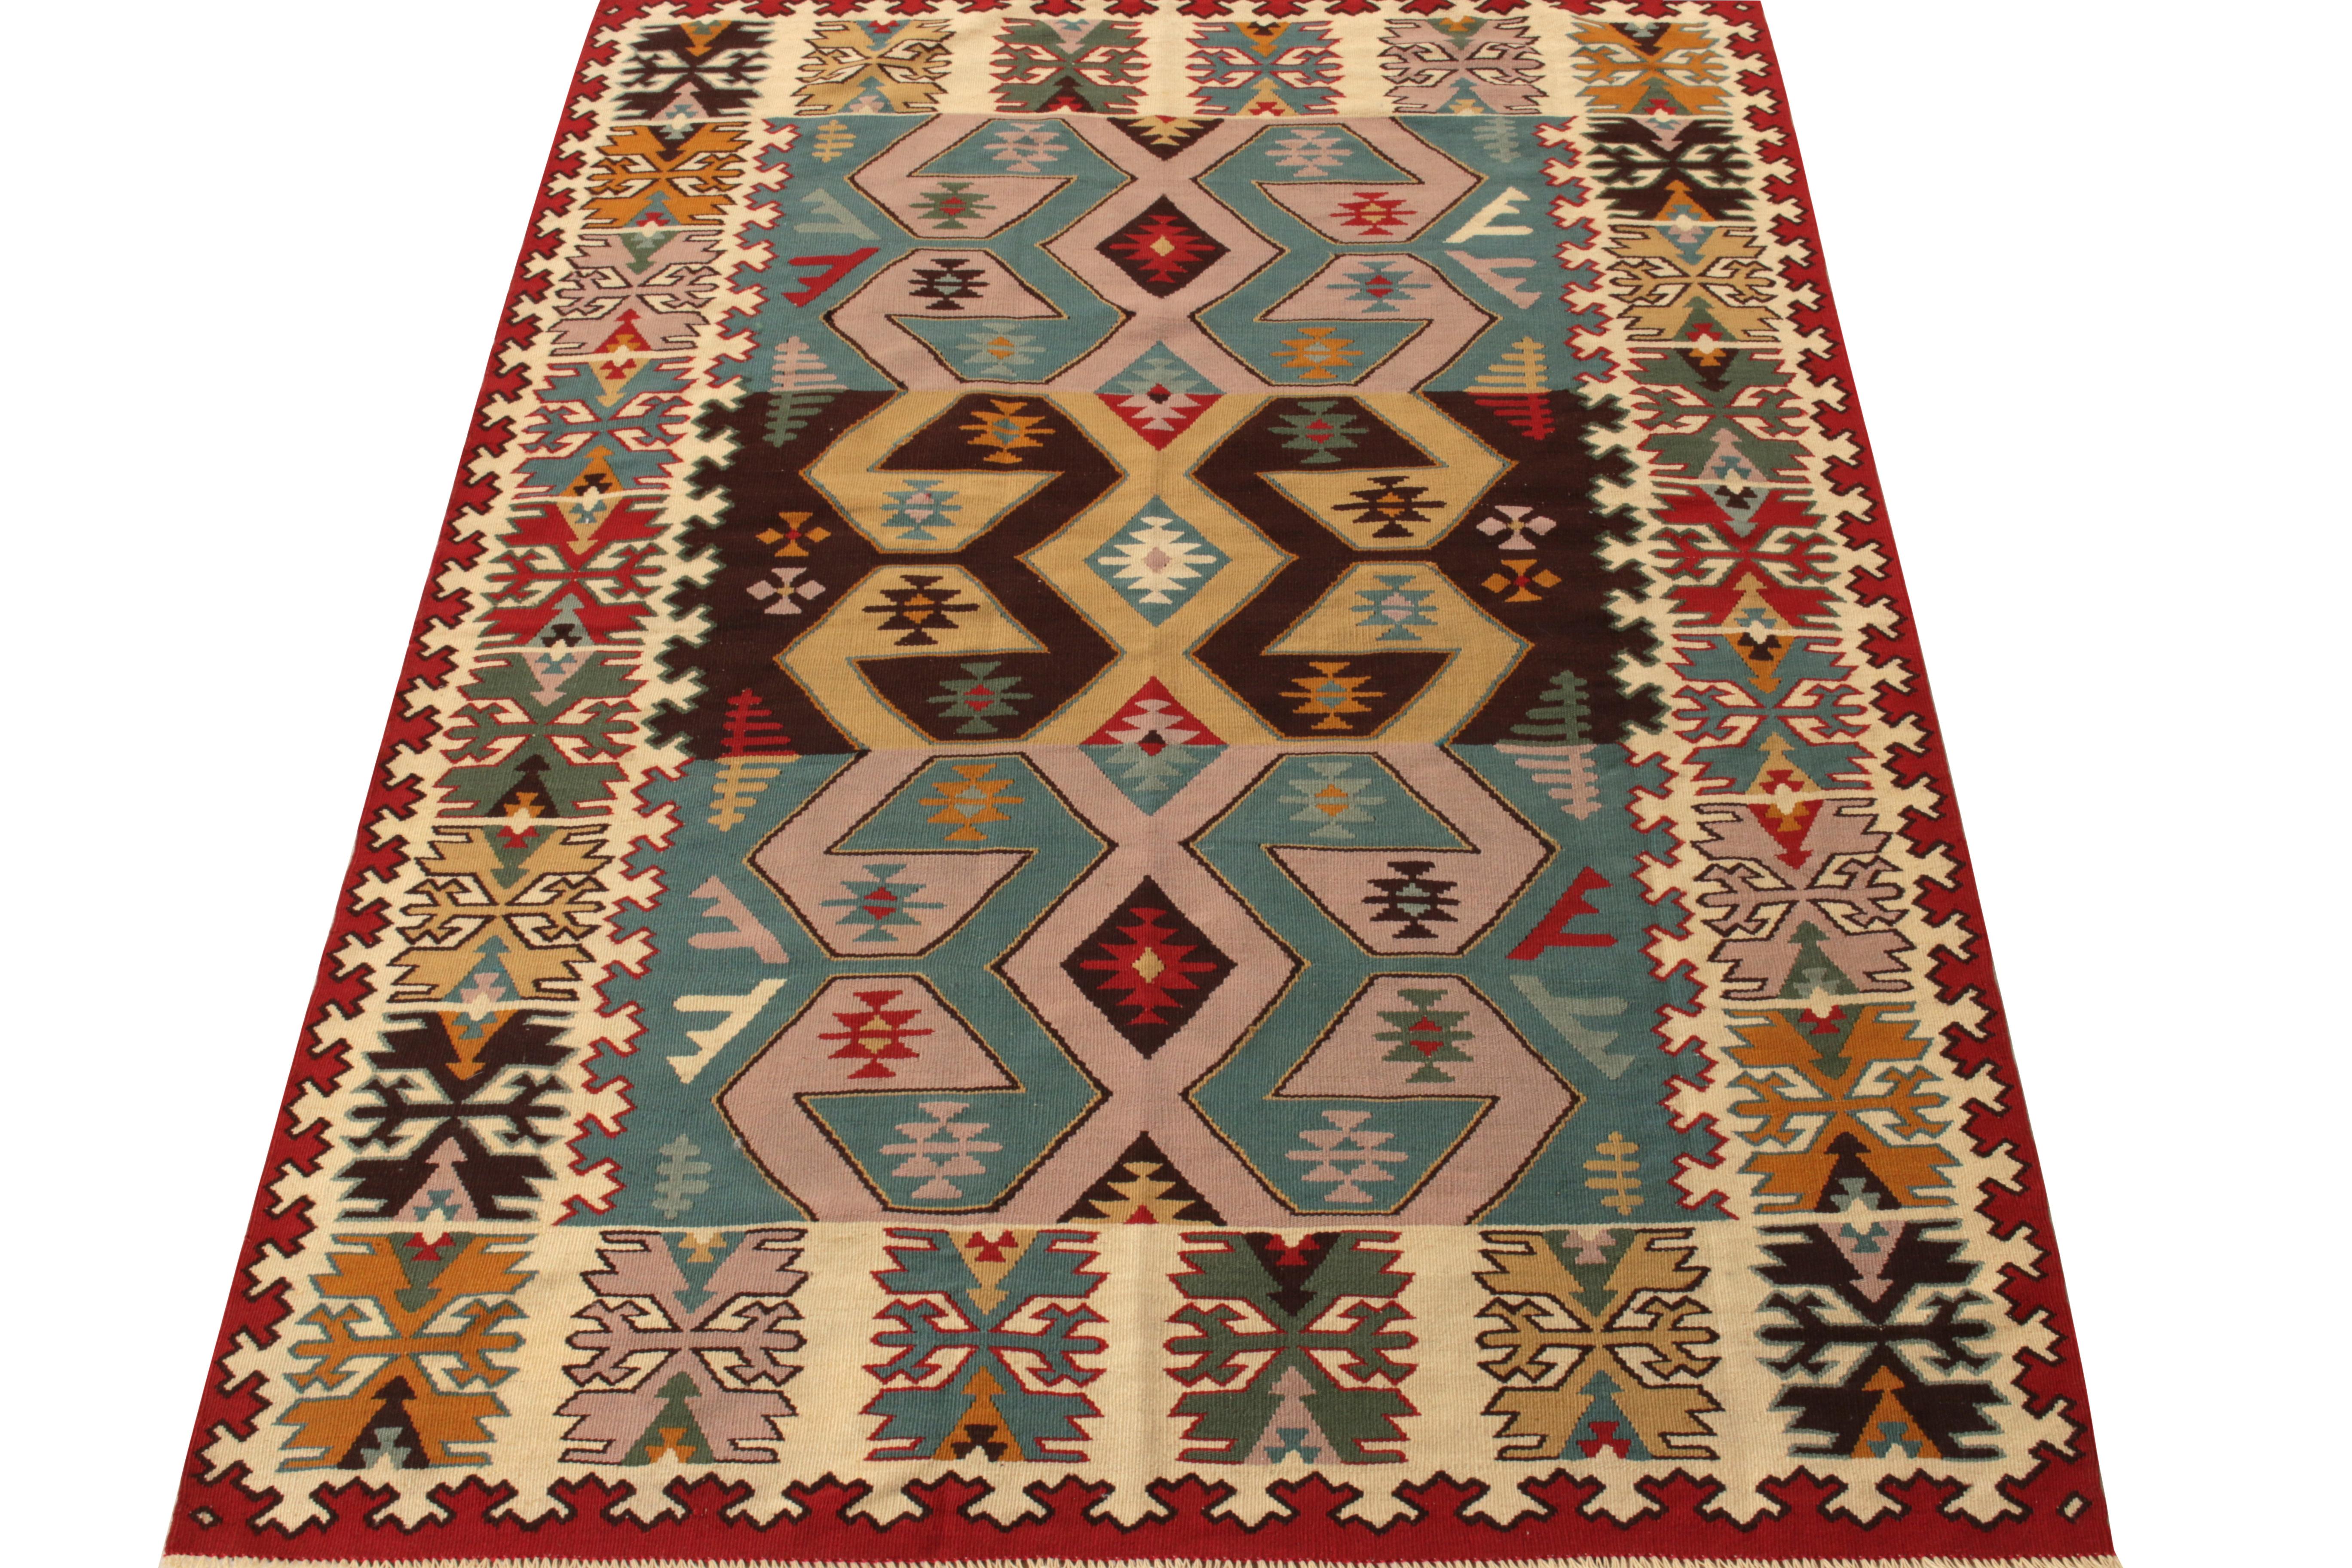 Handwoven in Turkey circa 1950-1960, an expressive vintage flatweave rug enjoying nomadic sensibilities entering our Kilim & Flatweave collection. The field features a tribal geometric pattern in bright kaleidoscopic shades sitting comfortably in